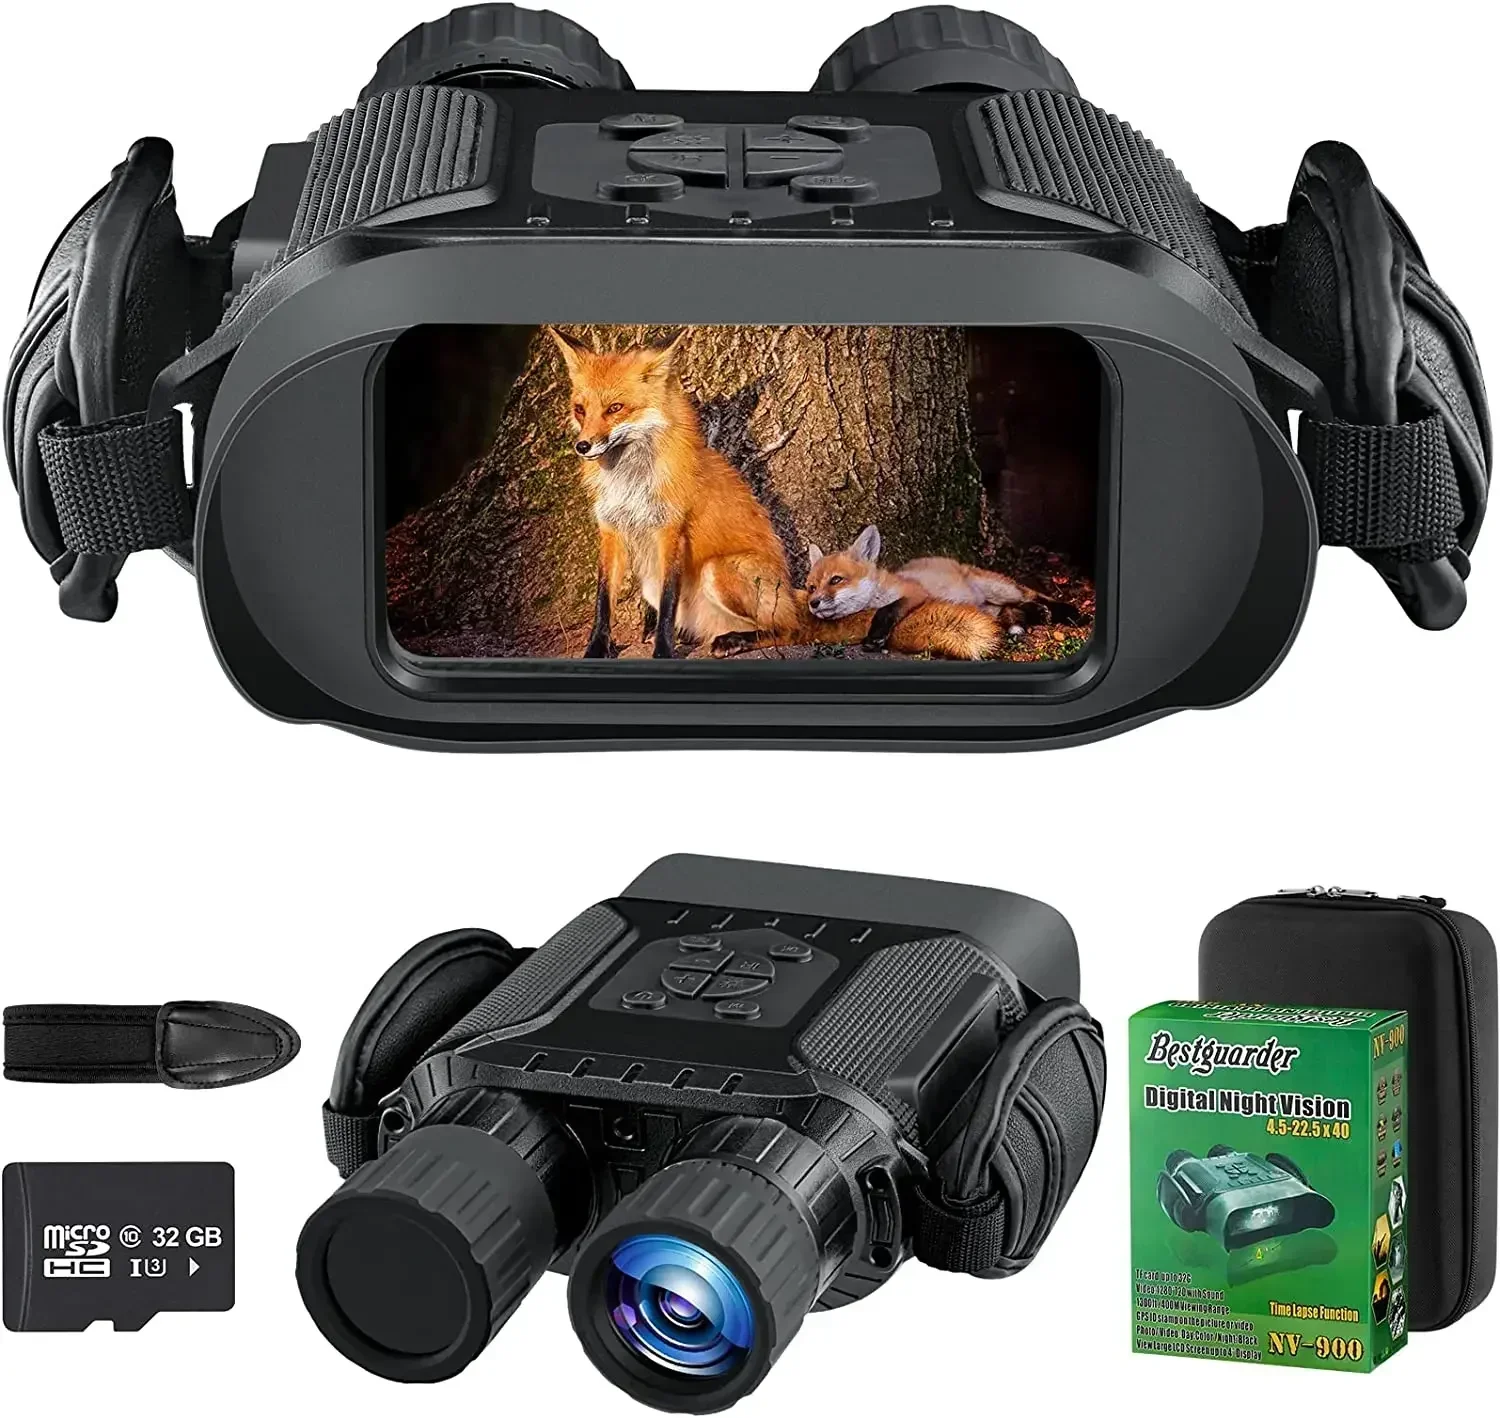 NV-900 720P Night Vision Goggles 5X Digital Zoom Infrared Hand-held Night Vision Binoculars with 32GB Card nv 900 720p night vision goggles 5x digital zoom infrared hand held night vision binoculars with 32gb card